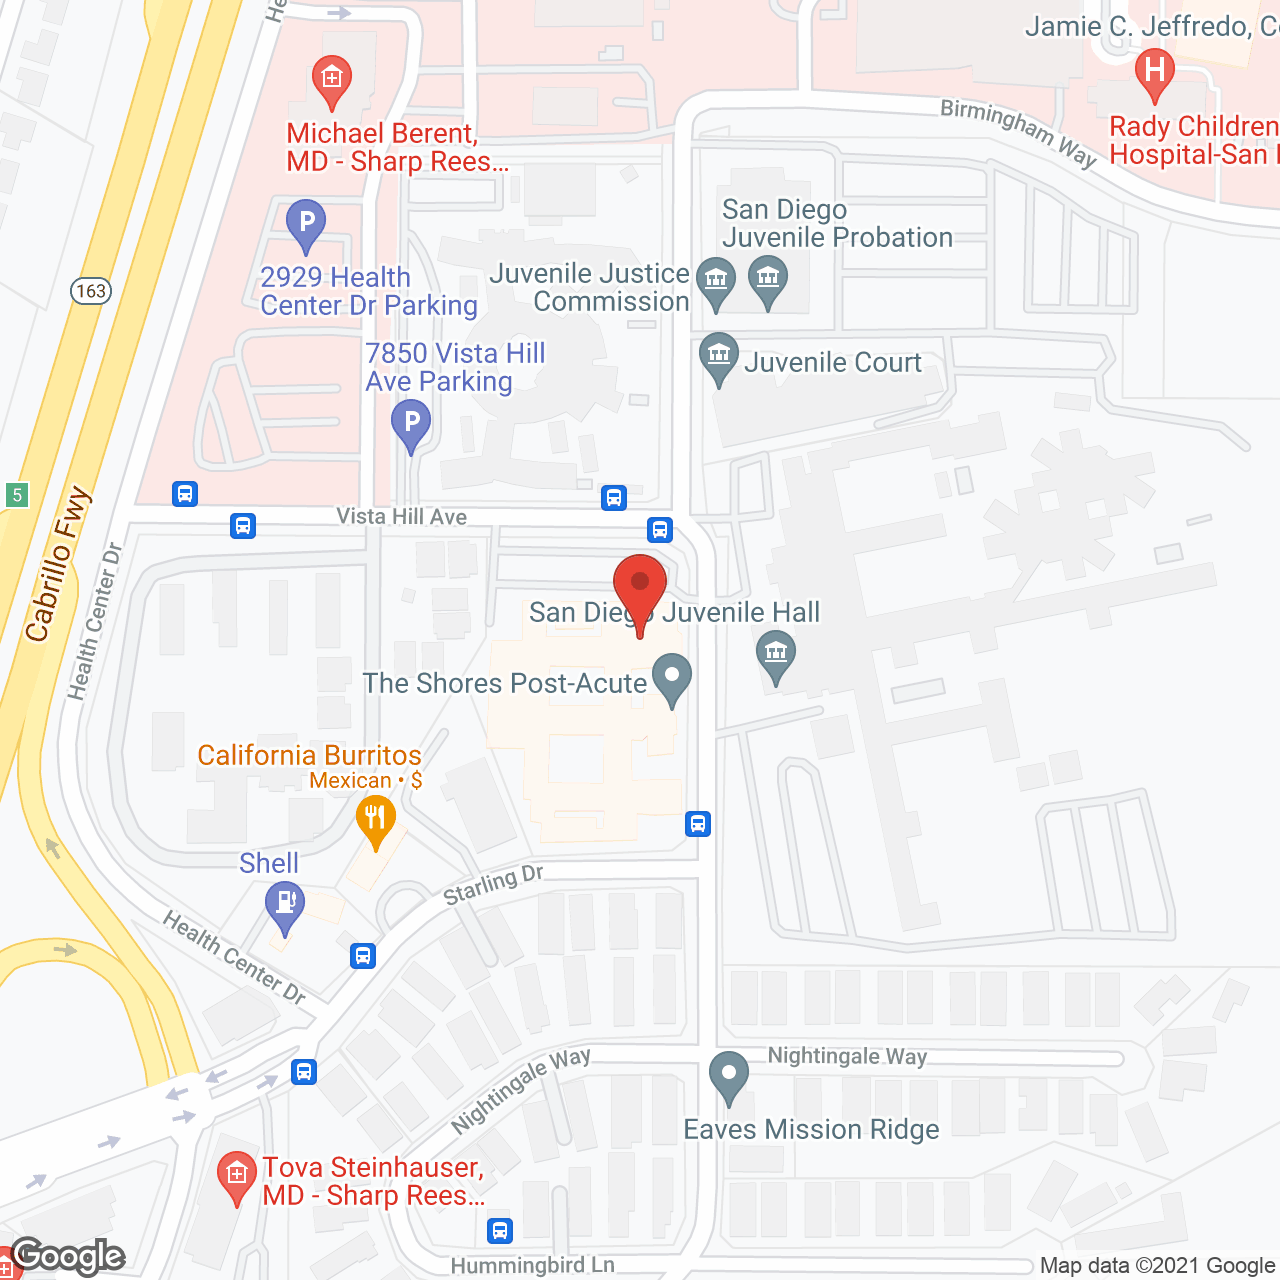 San Diego Healthcare Center in google map